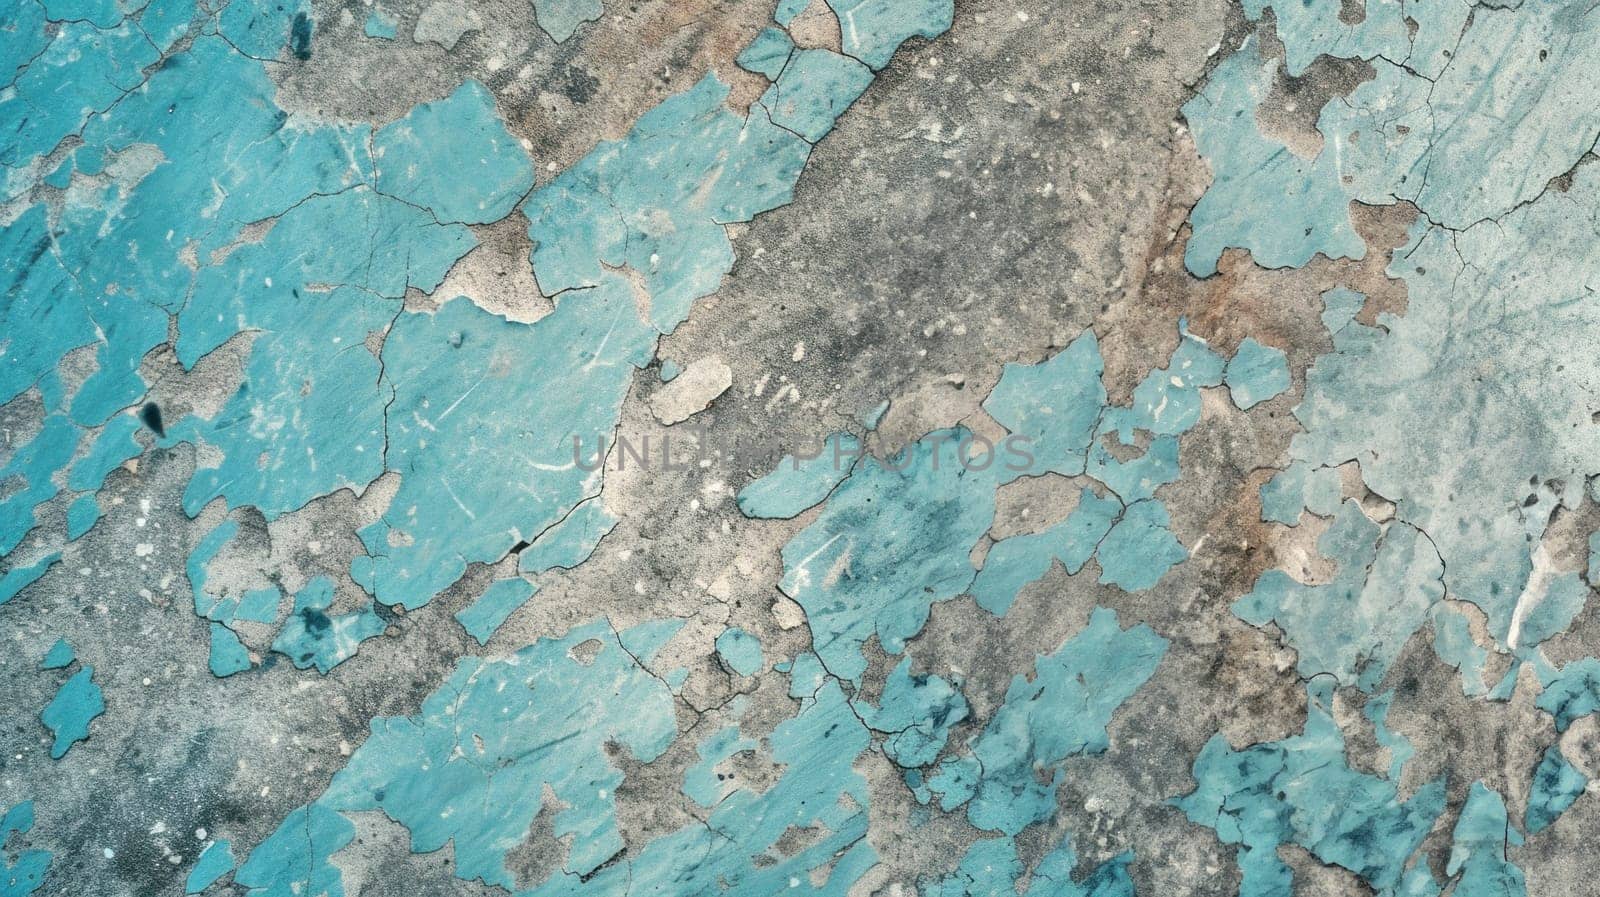 Vintage patina on textured surface. Created using AI generated technology and image editing software.